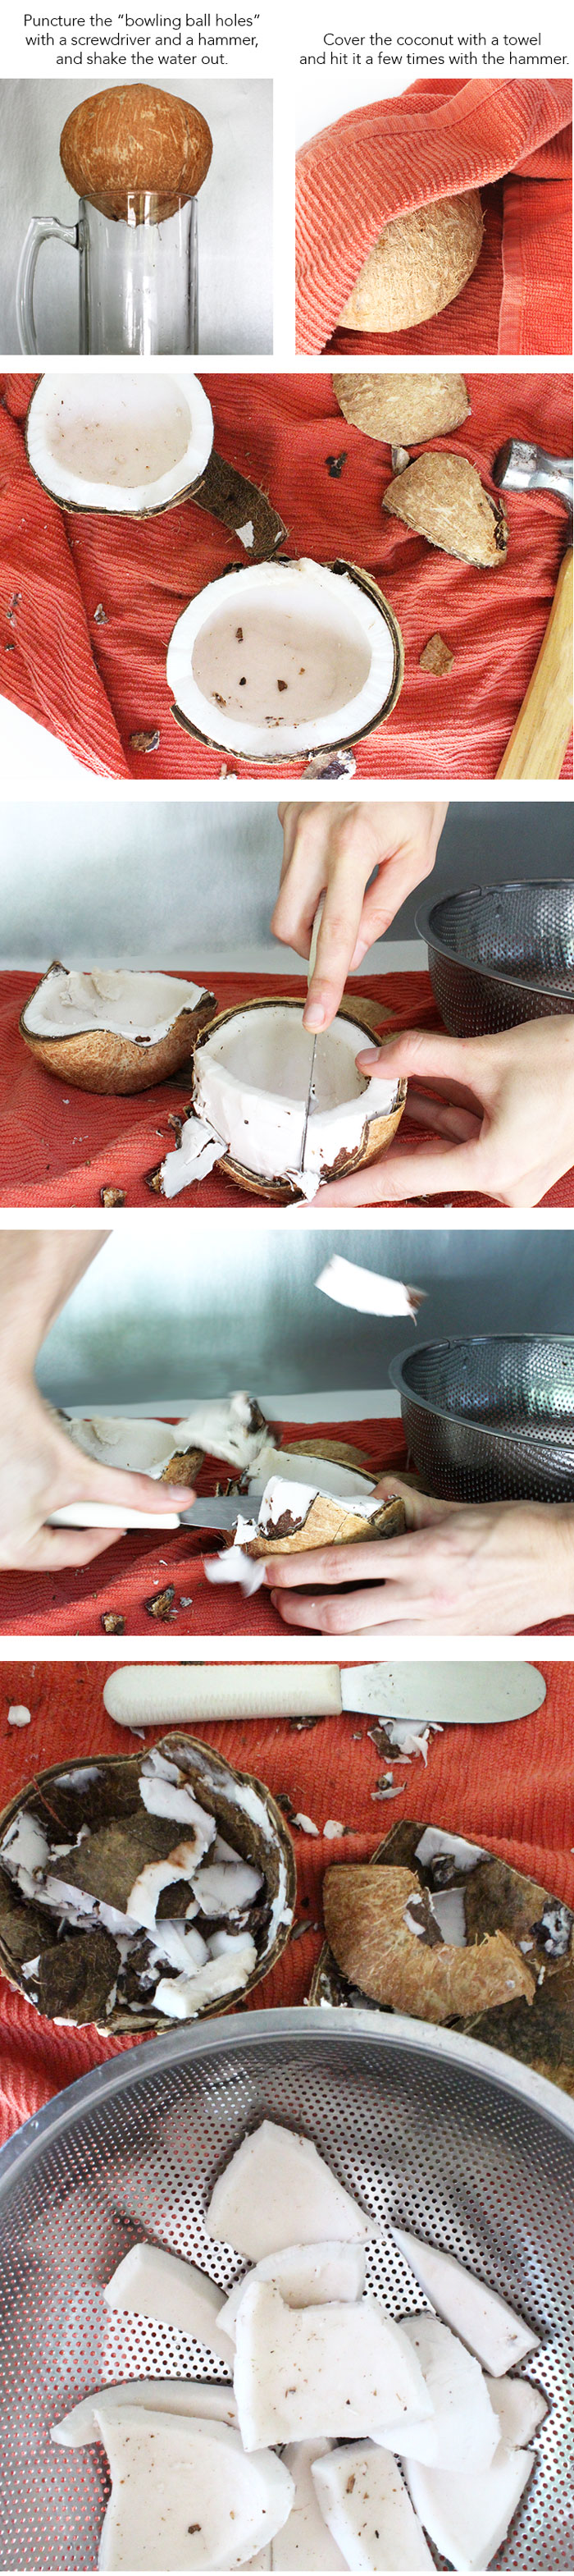 How to open a coconut